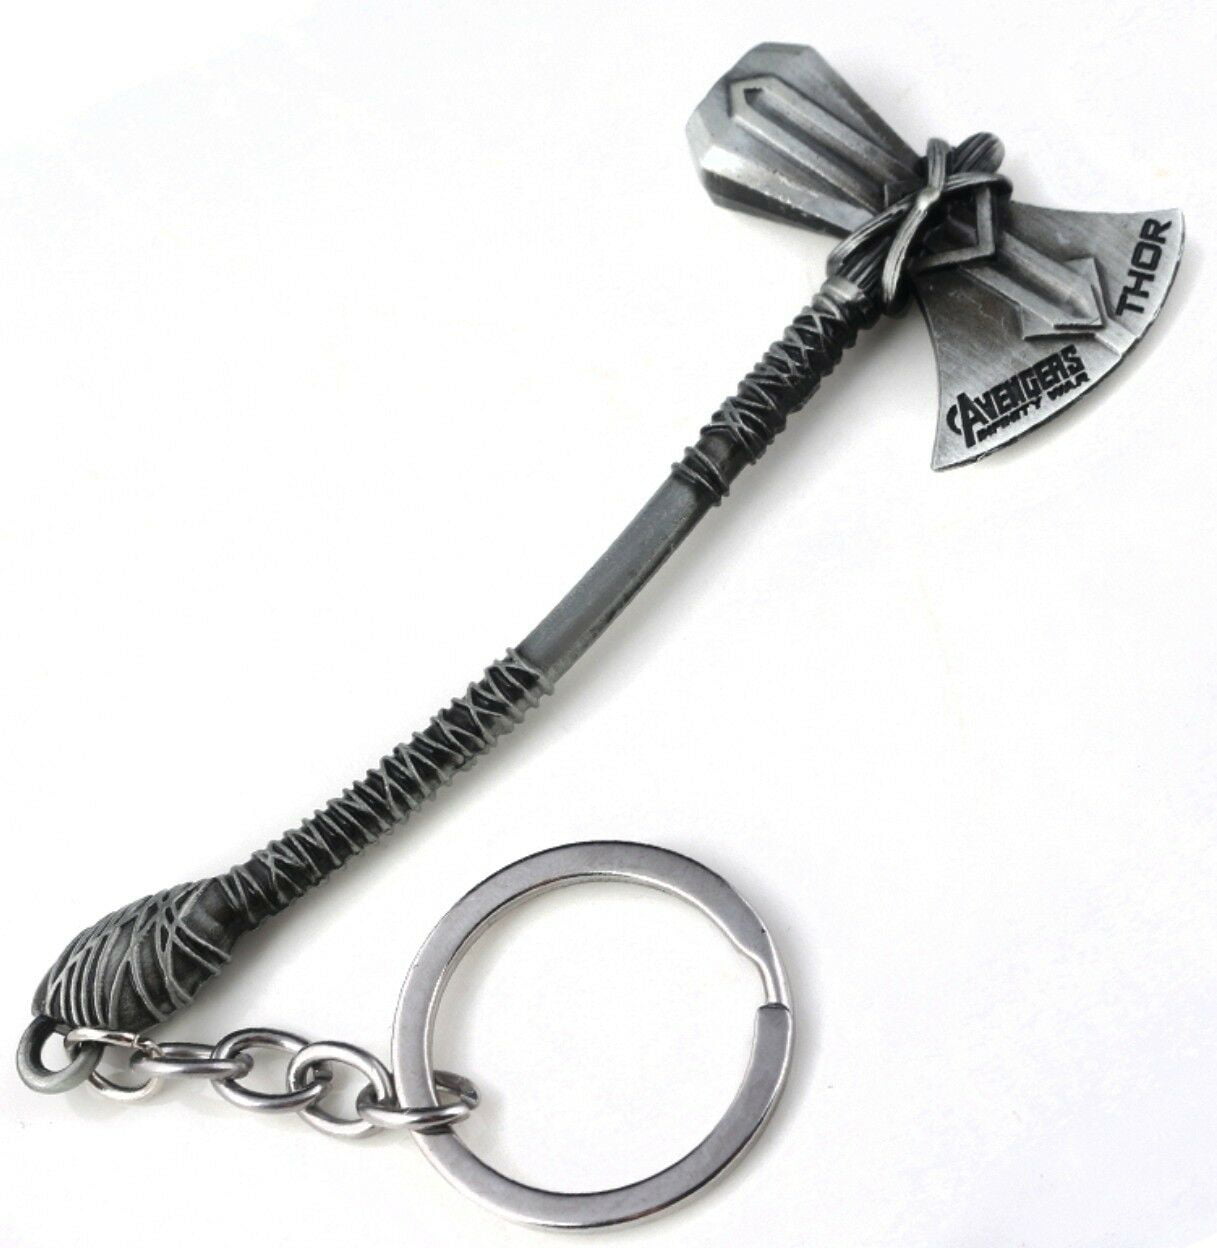 Copper Courage Blessing Axe Bag Pendant Key Chain Keyring 